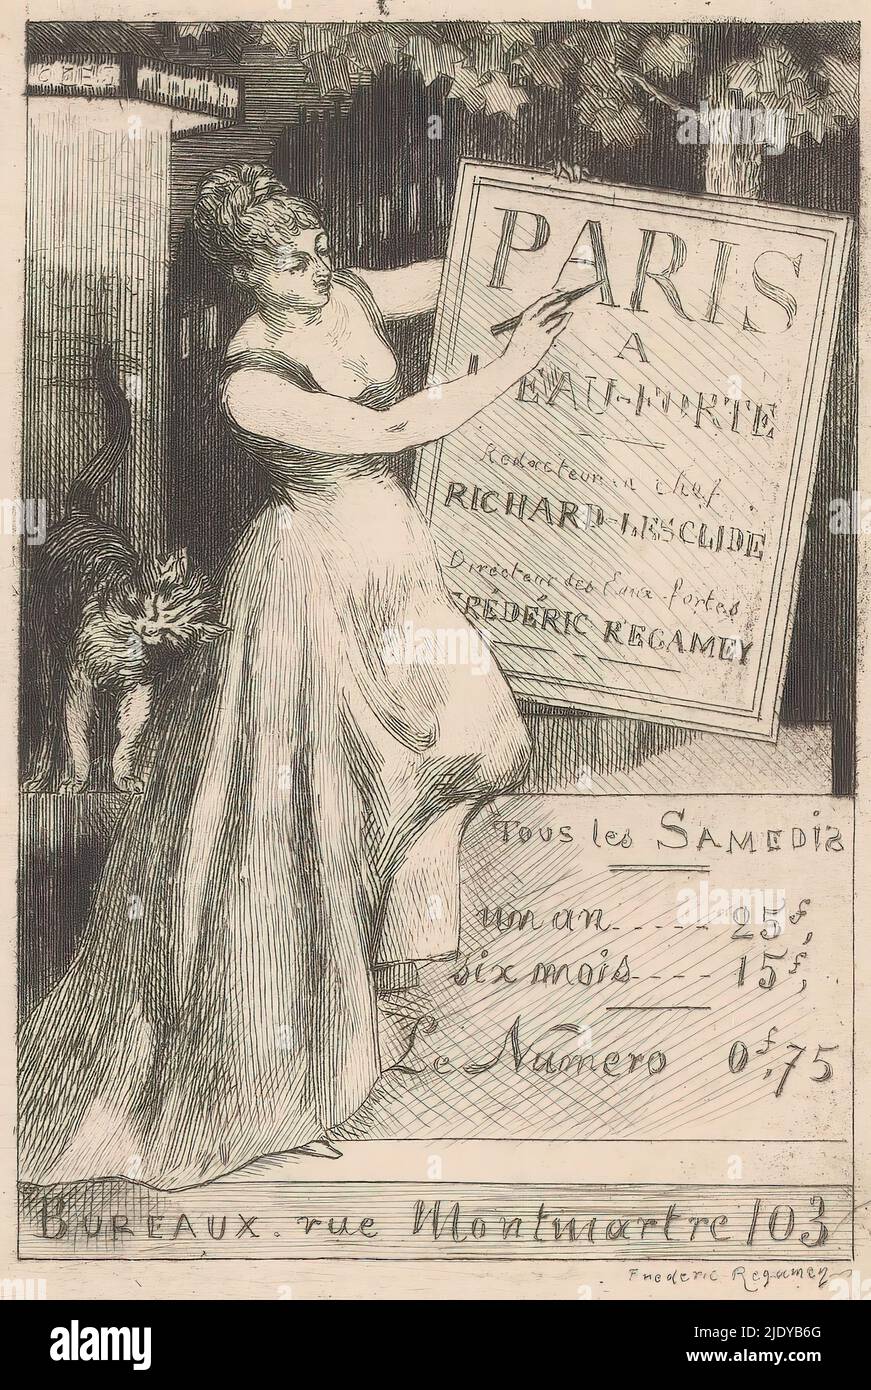 Woman advertises 'Paris à l'eau-forte' magazine, A woman writes advertisements for 'Paris à l'eau-forte' on a board. She receives a cup from a cat standing in front of an advertising column., print maker: Frédéric Regamey, (mentioned on object), Paris, 1873 - 1876, paper, etching, height 87 mm × width 61 mm Stock Photo